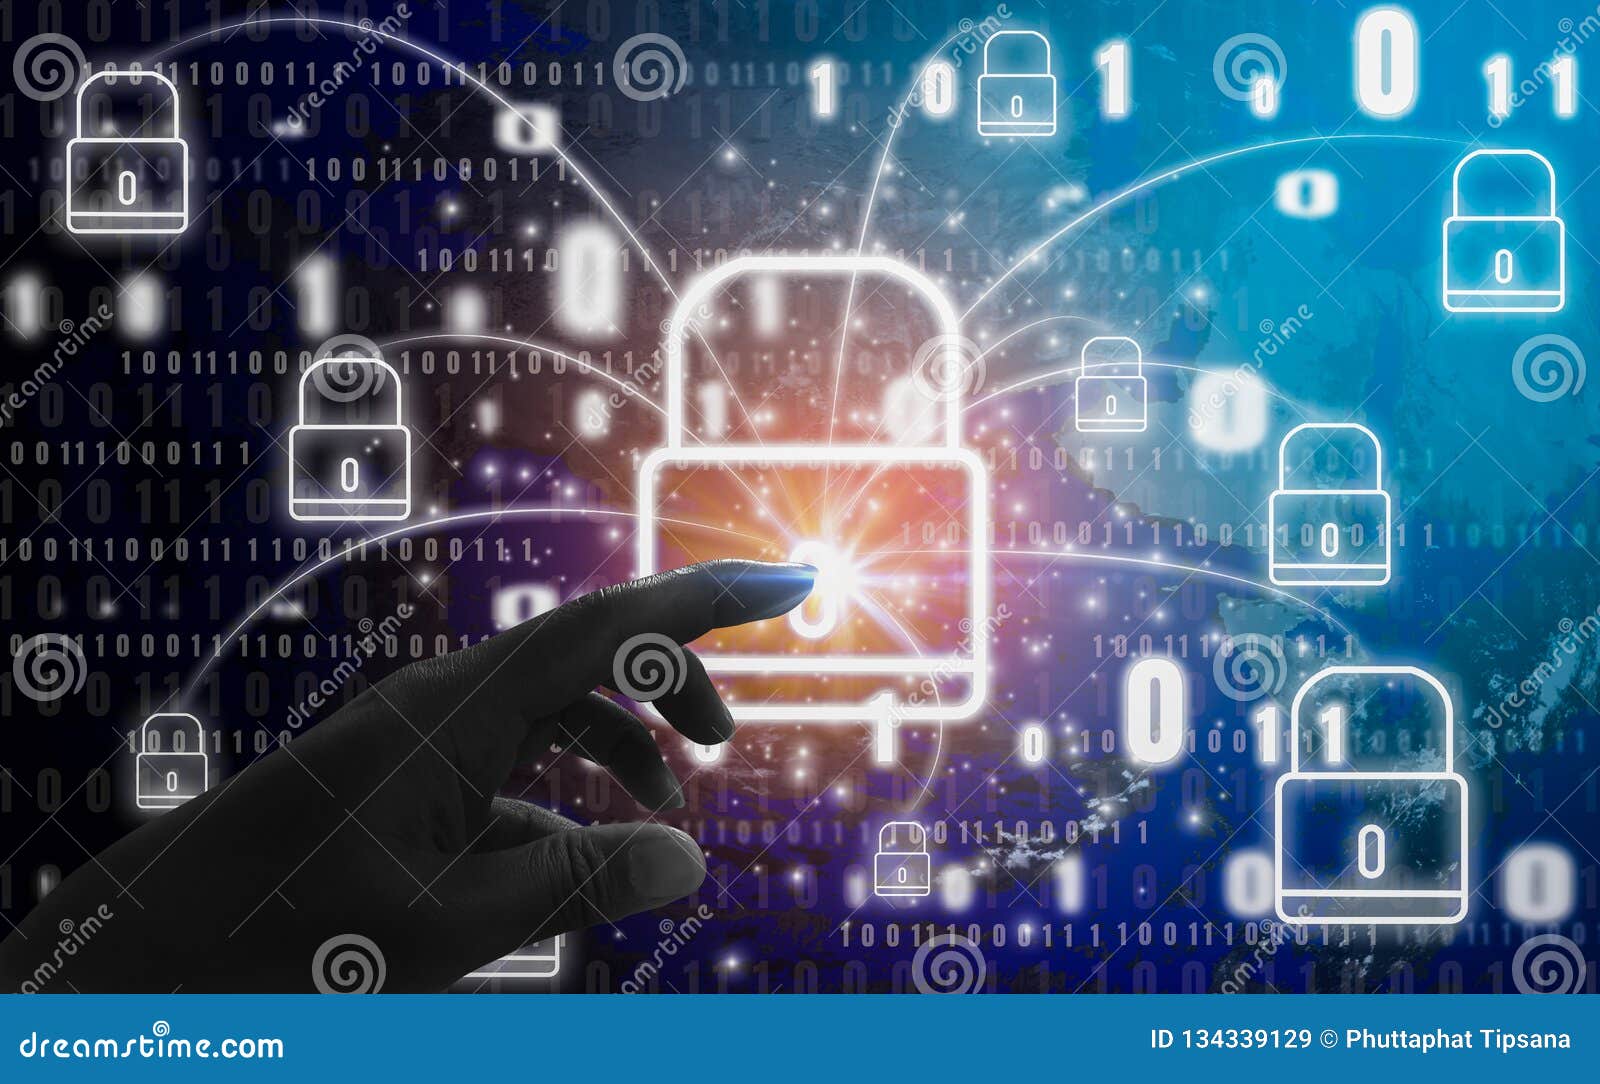 abstract concept, fingers are touching padlock , with protection of digital identity theft and privacy, online database and